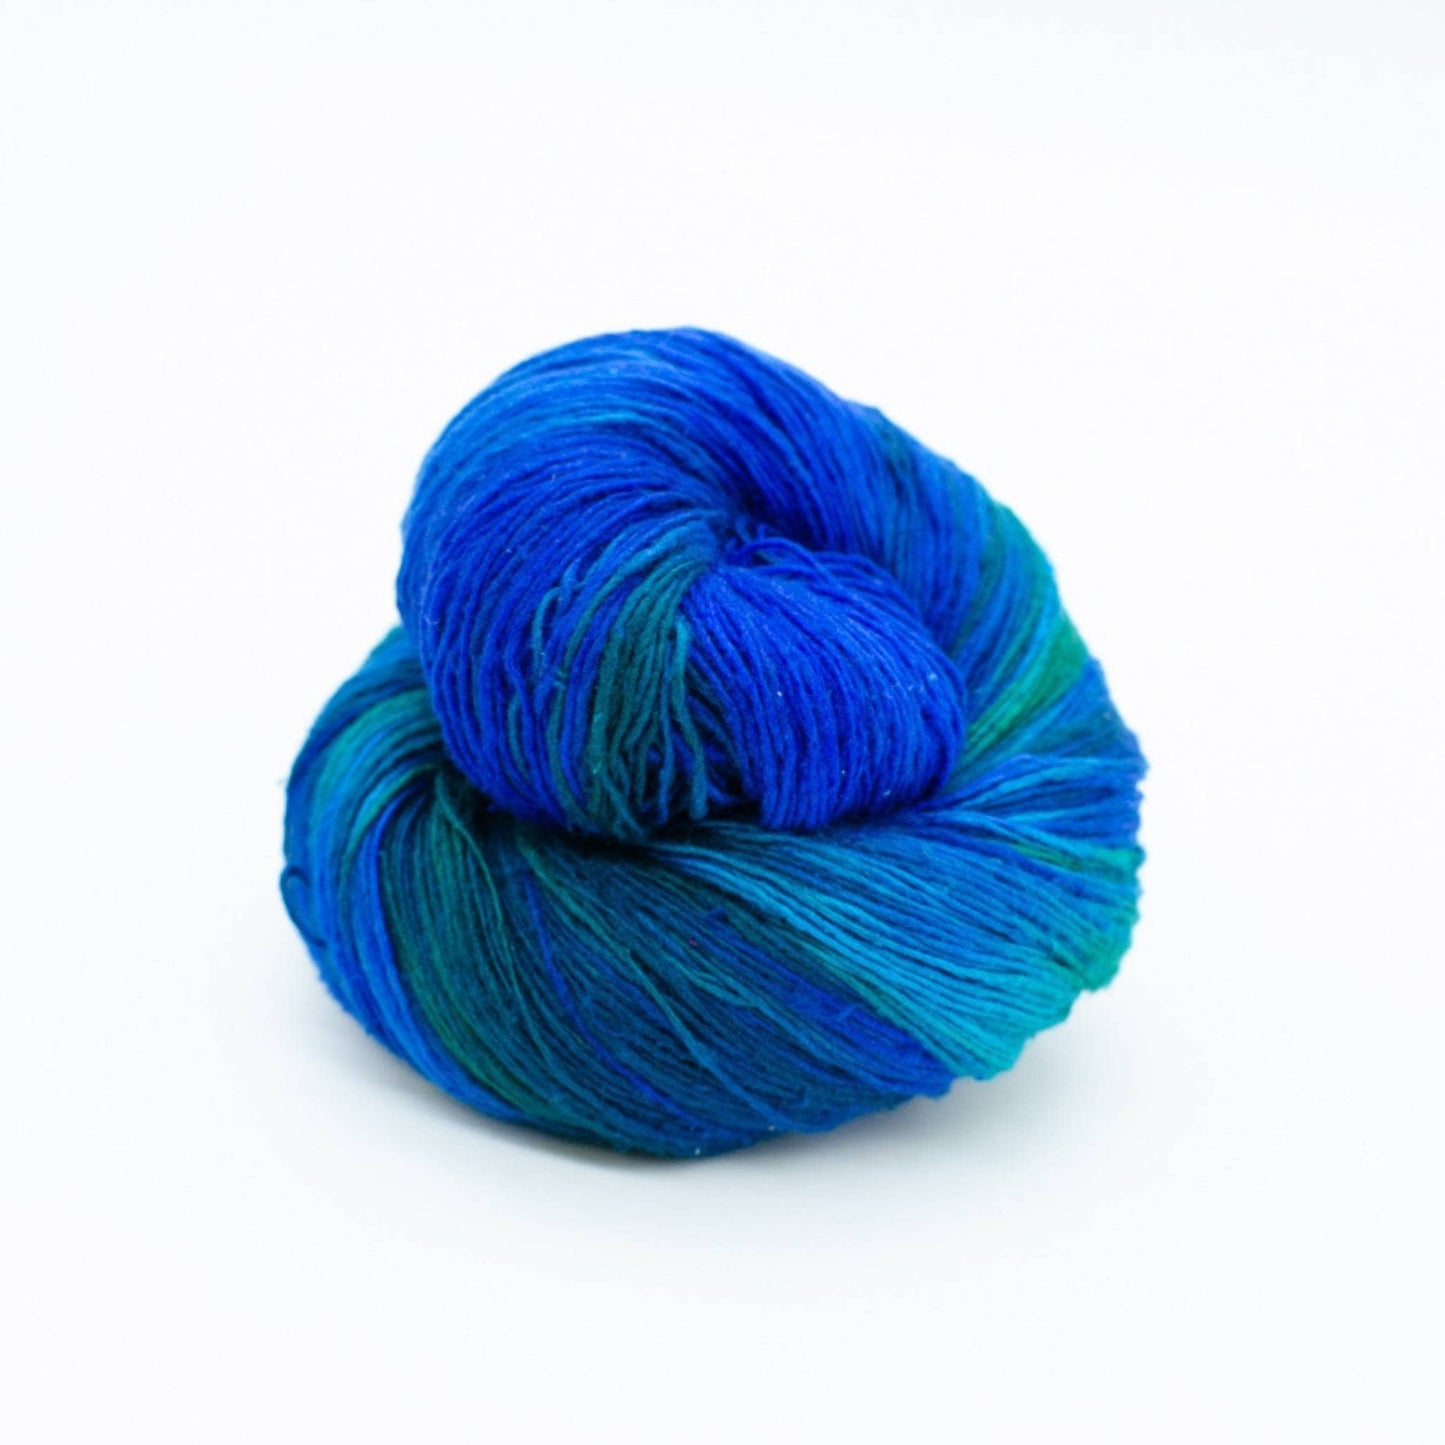 Lace weight silk yarn in color way Enchanted Forest (green and blue) in front of white background.